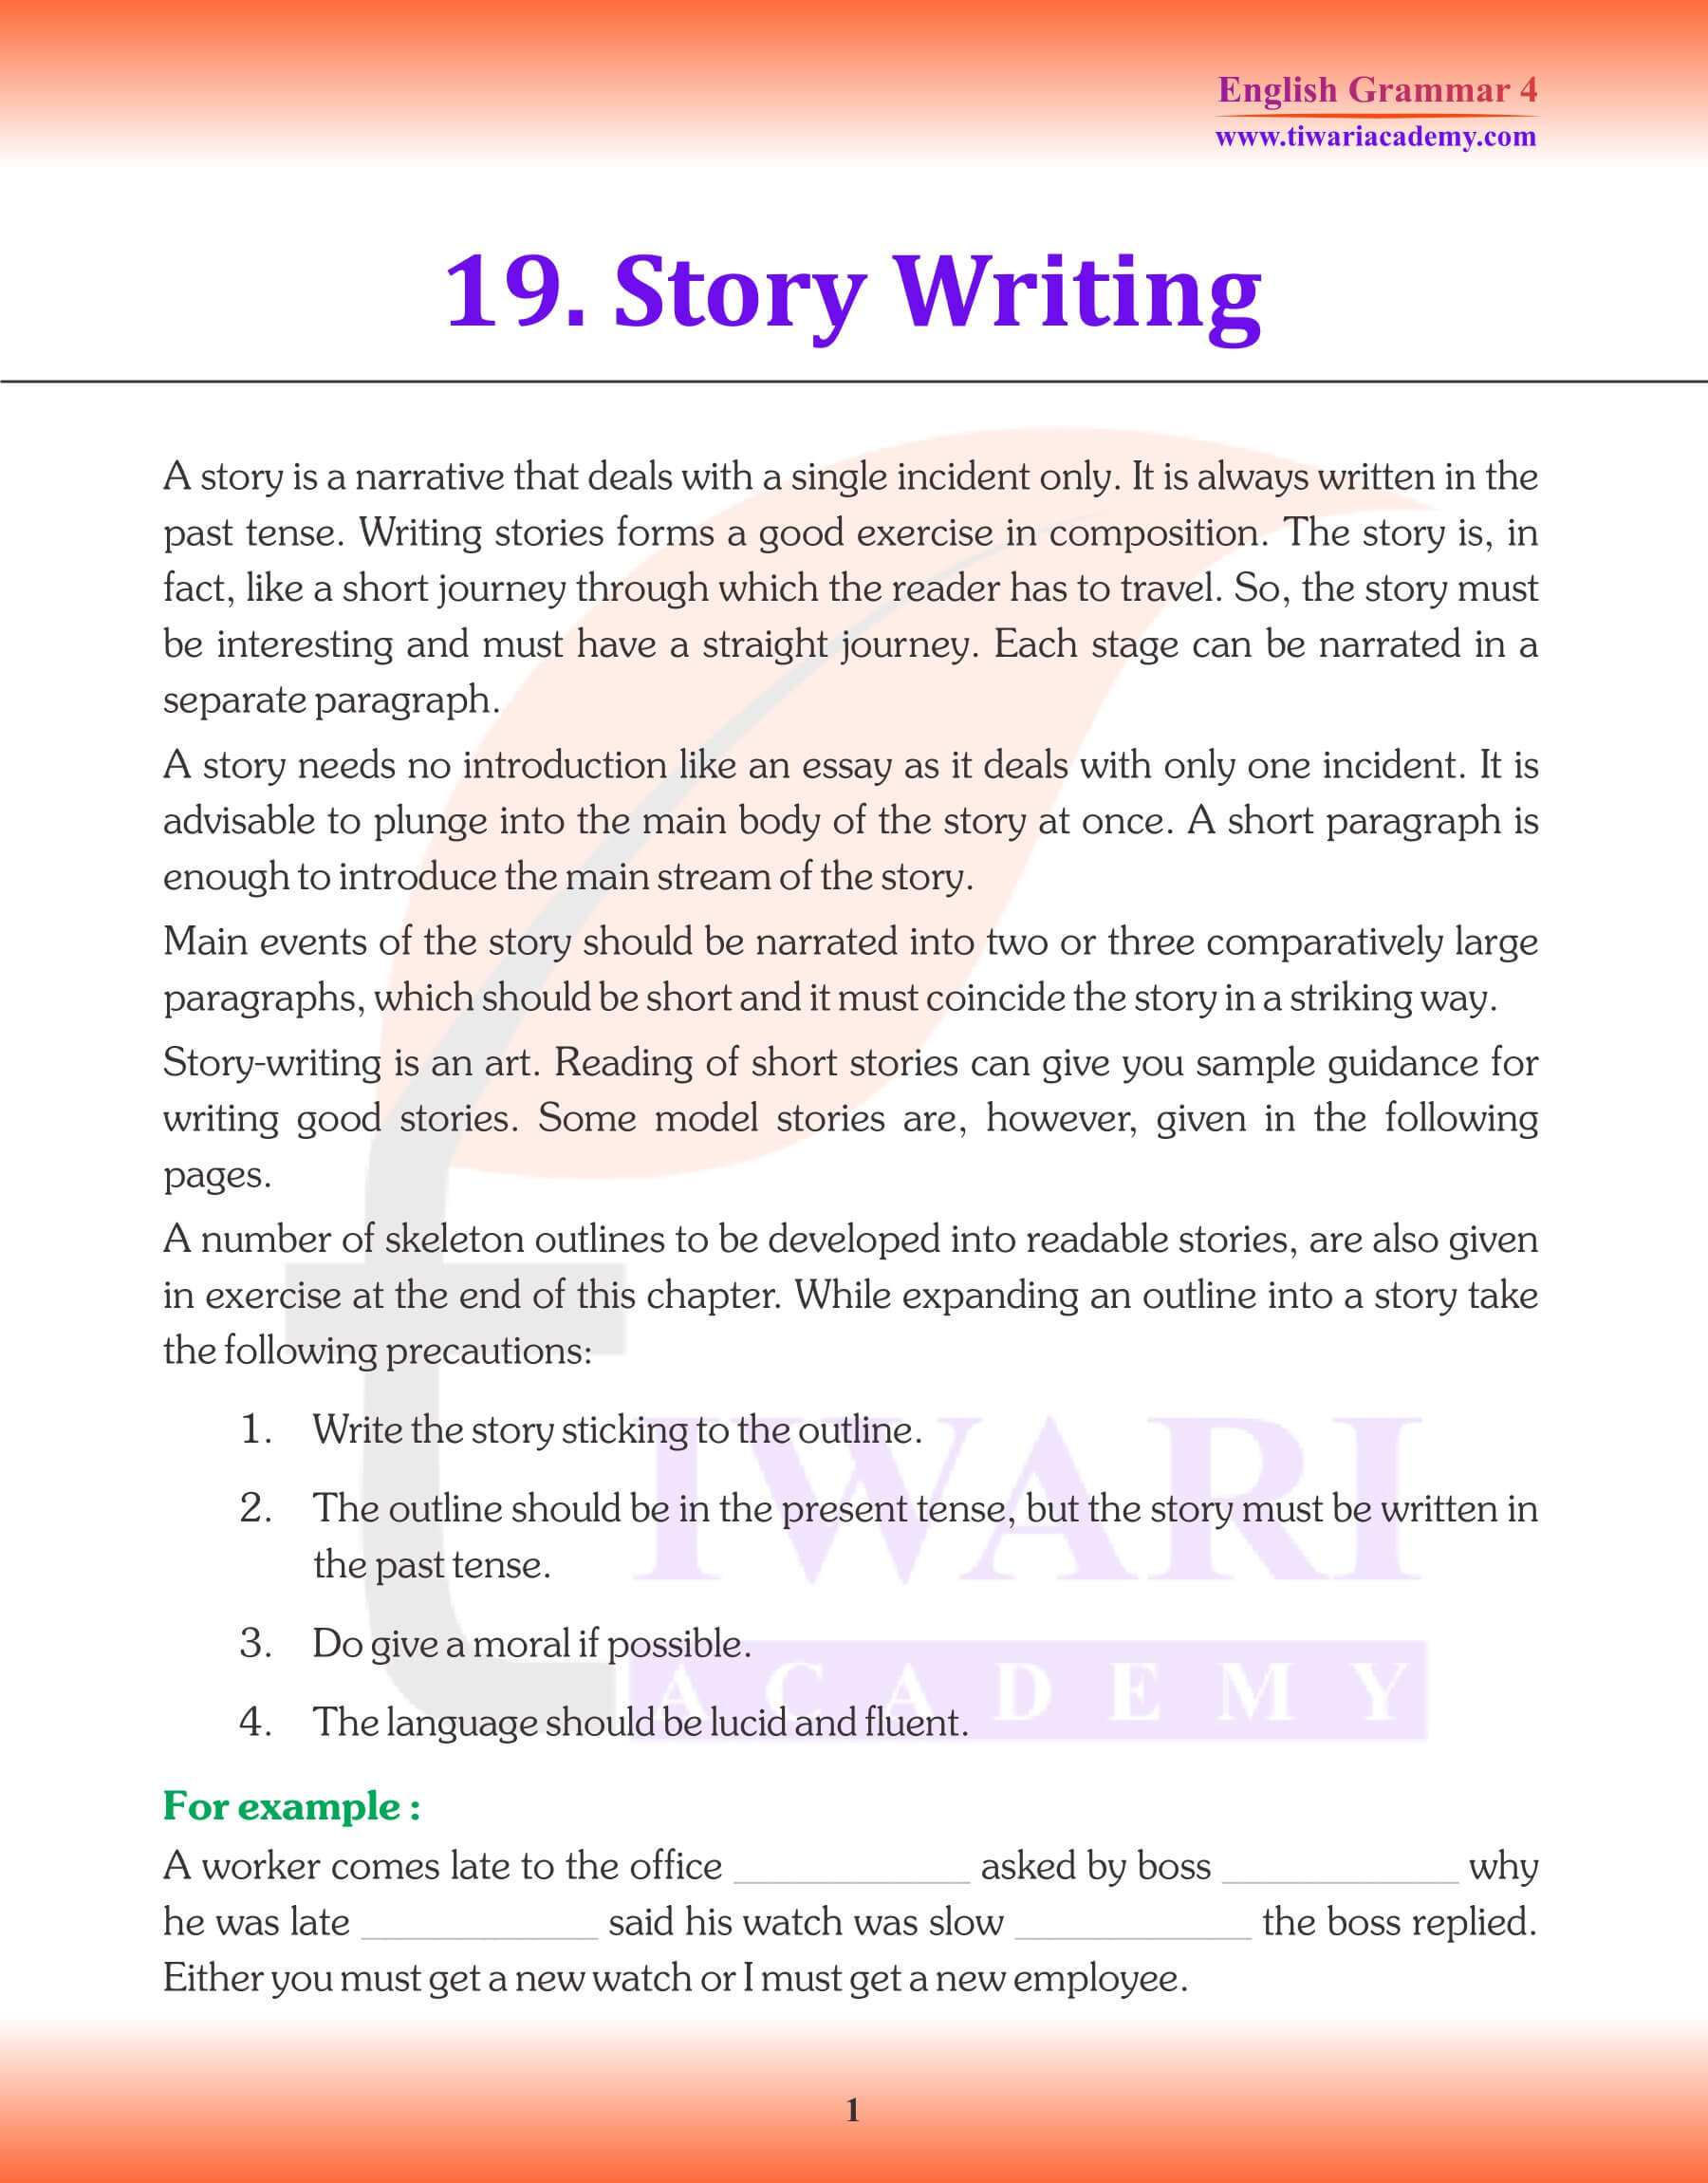 Class 4 English Grammar Story Writing Revision Book